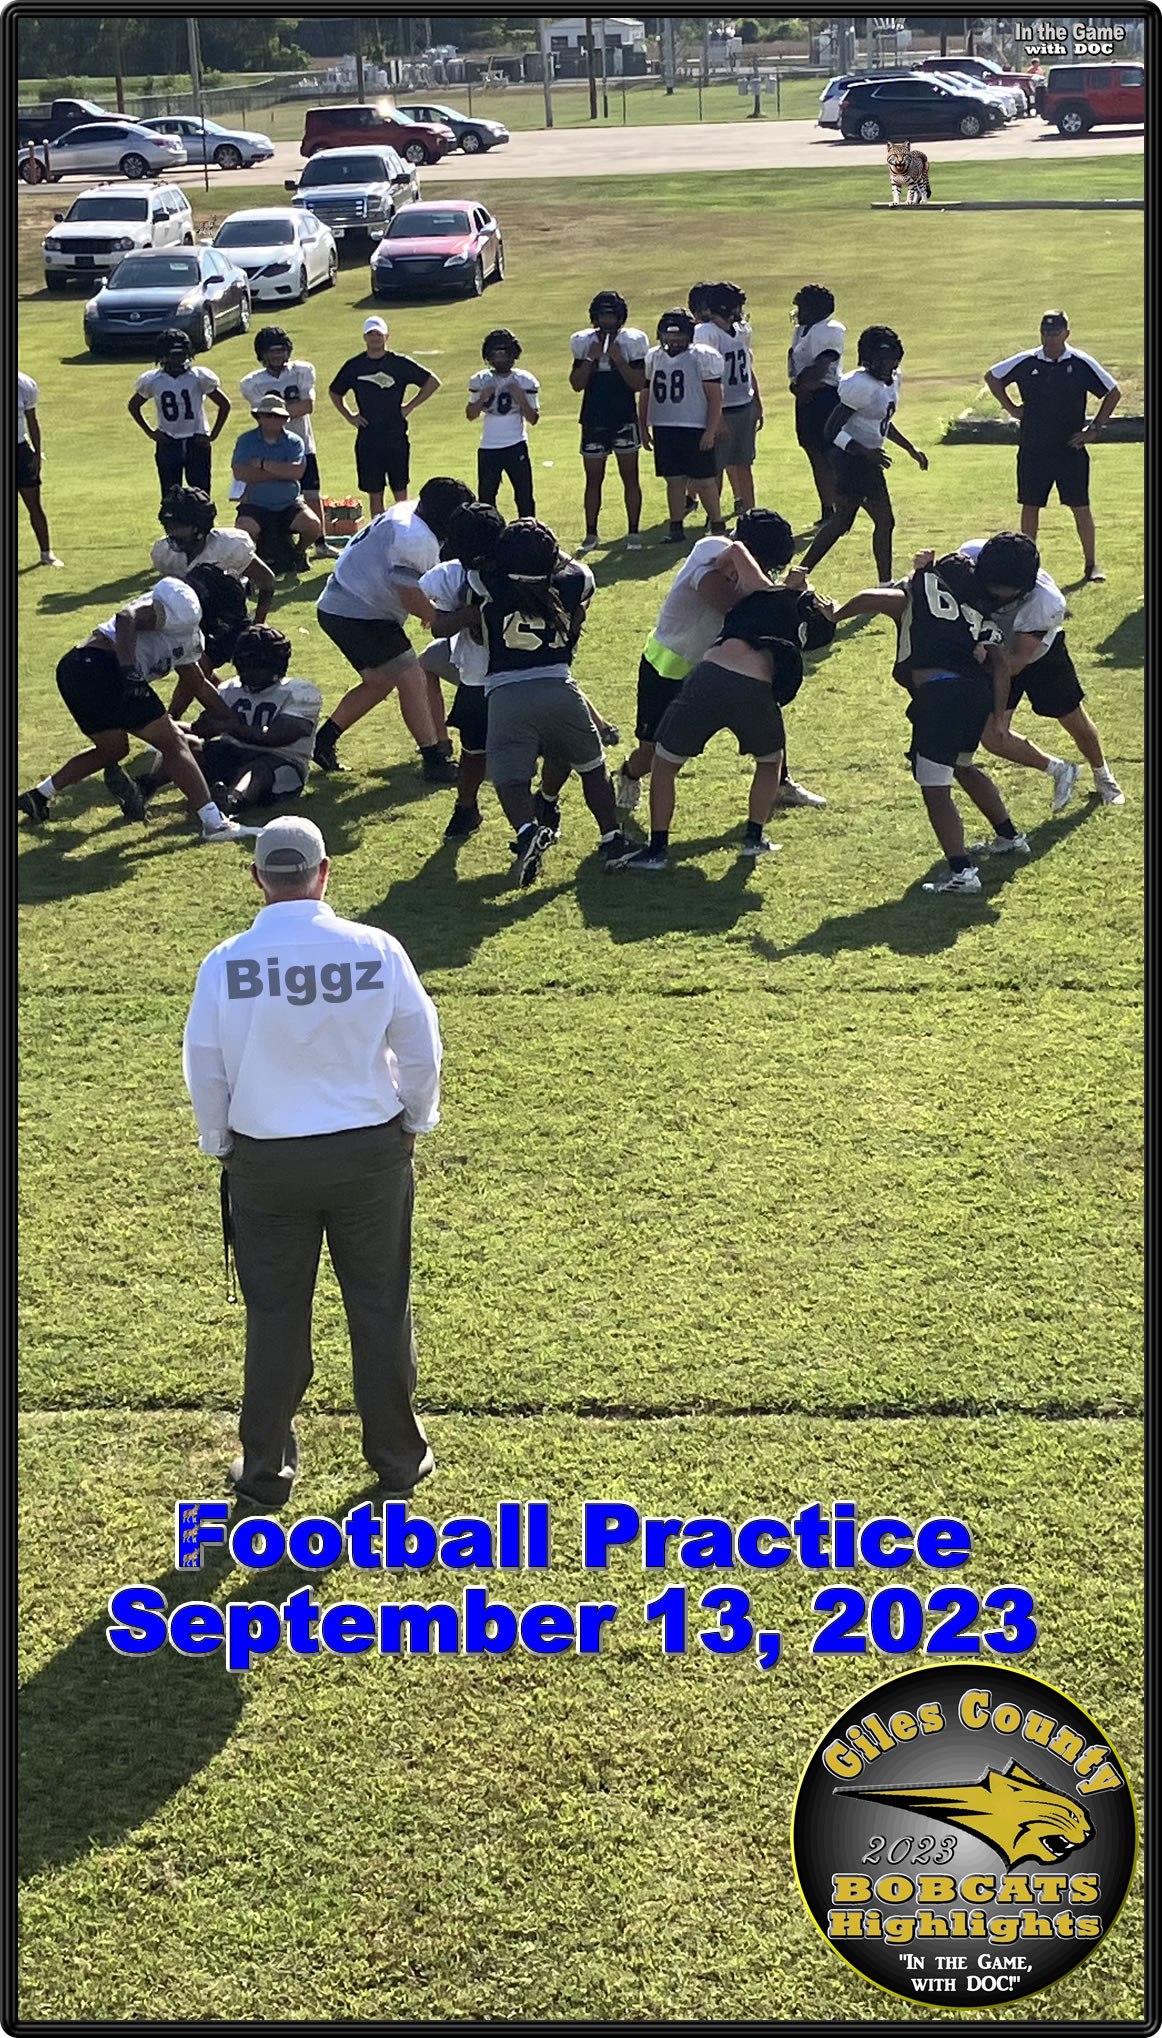 Giles County Bobcats Football Practice September 13, 2023 by In the Game with DOC #itisandiamit